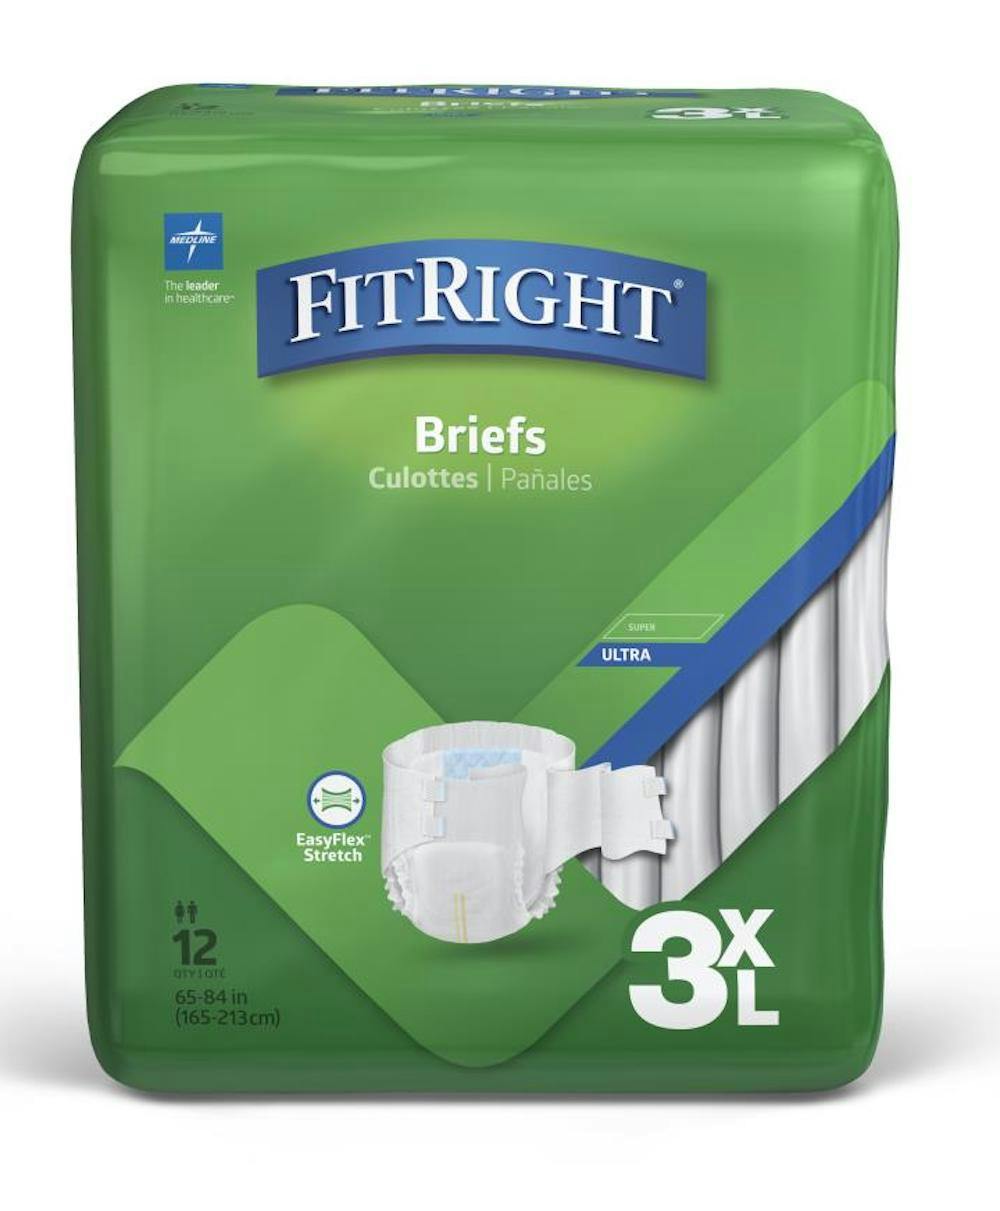 FitRight Disposable Cloth-Like Briefs Bariatric Adult Diapers with Tabs, Maximum Absorbency, MTB084Z, 3XL - Bag of 12